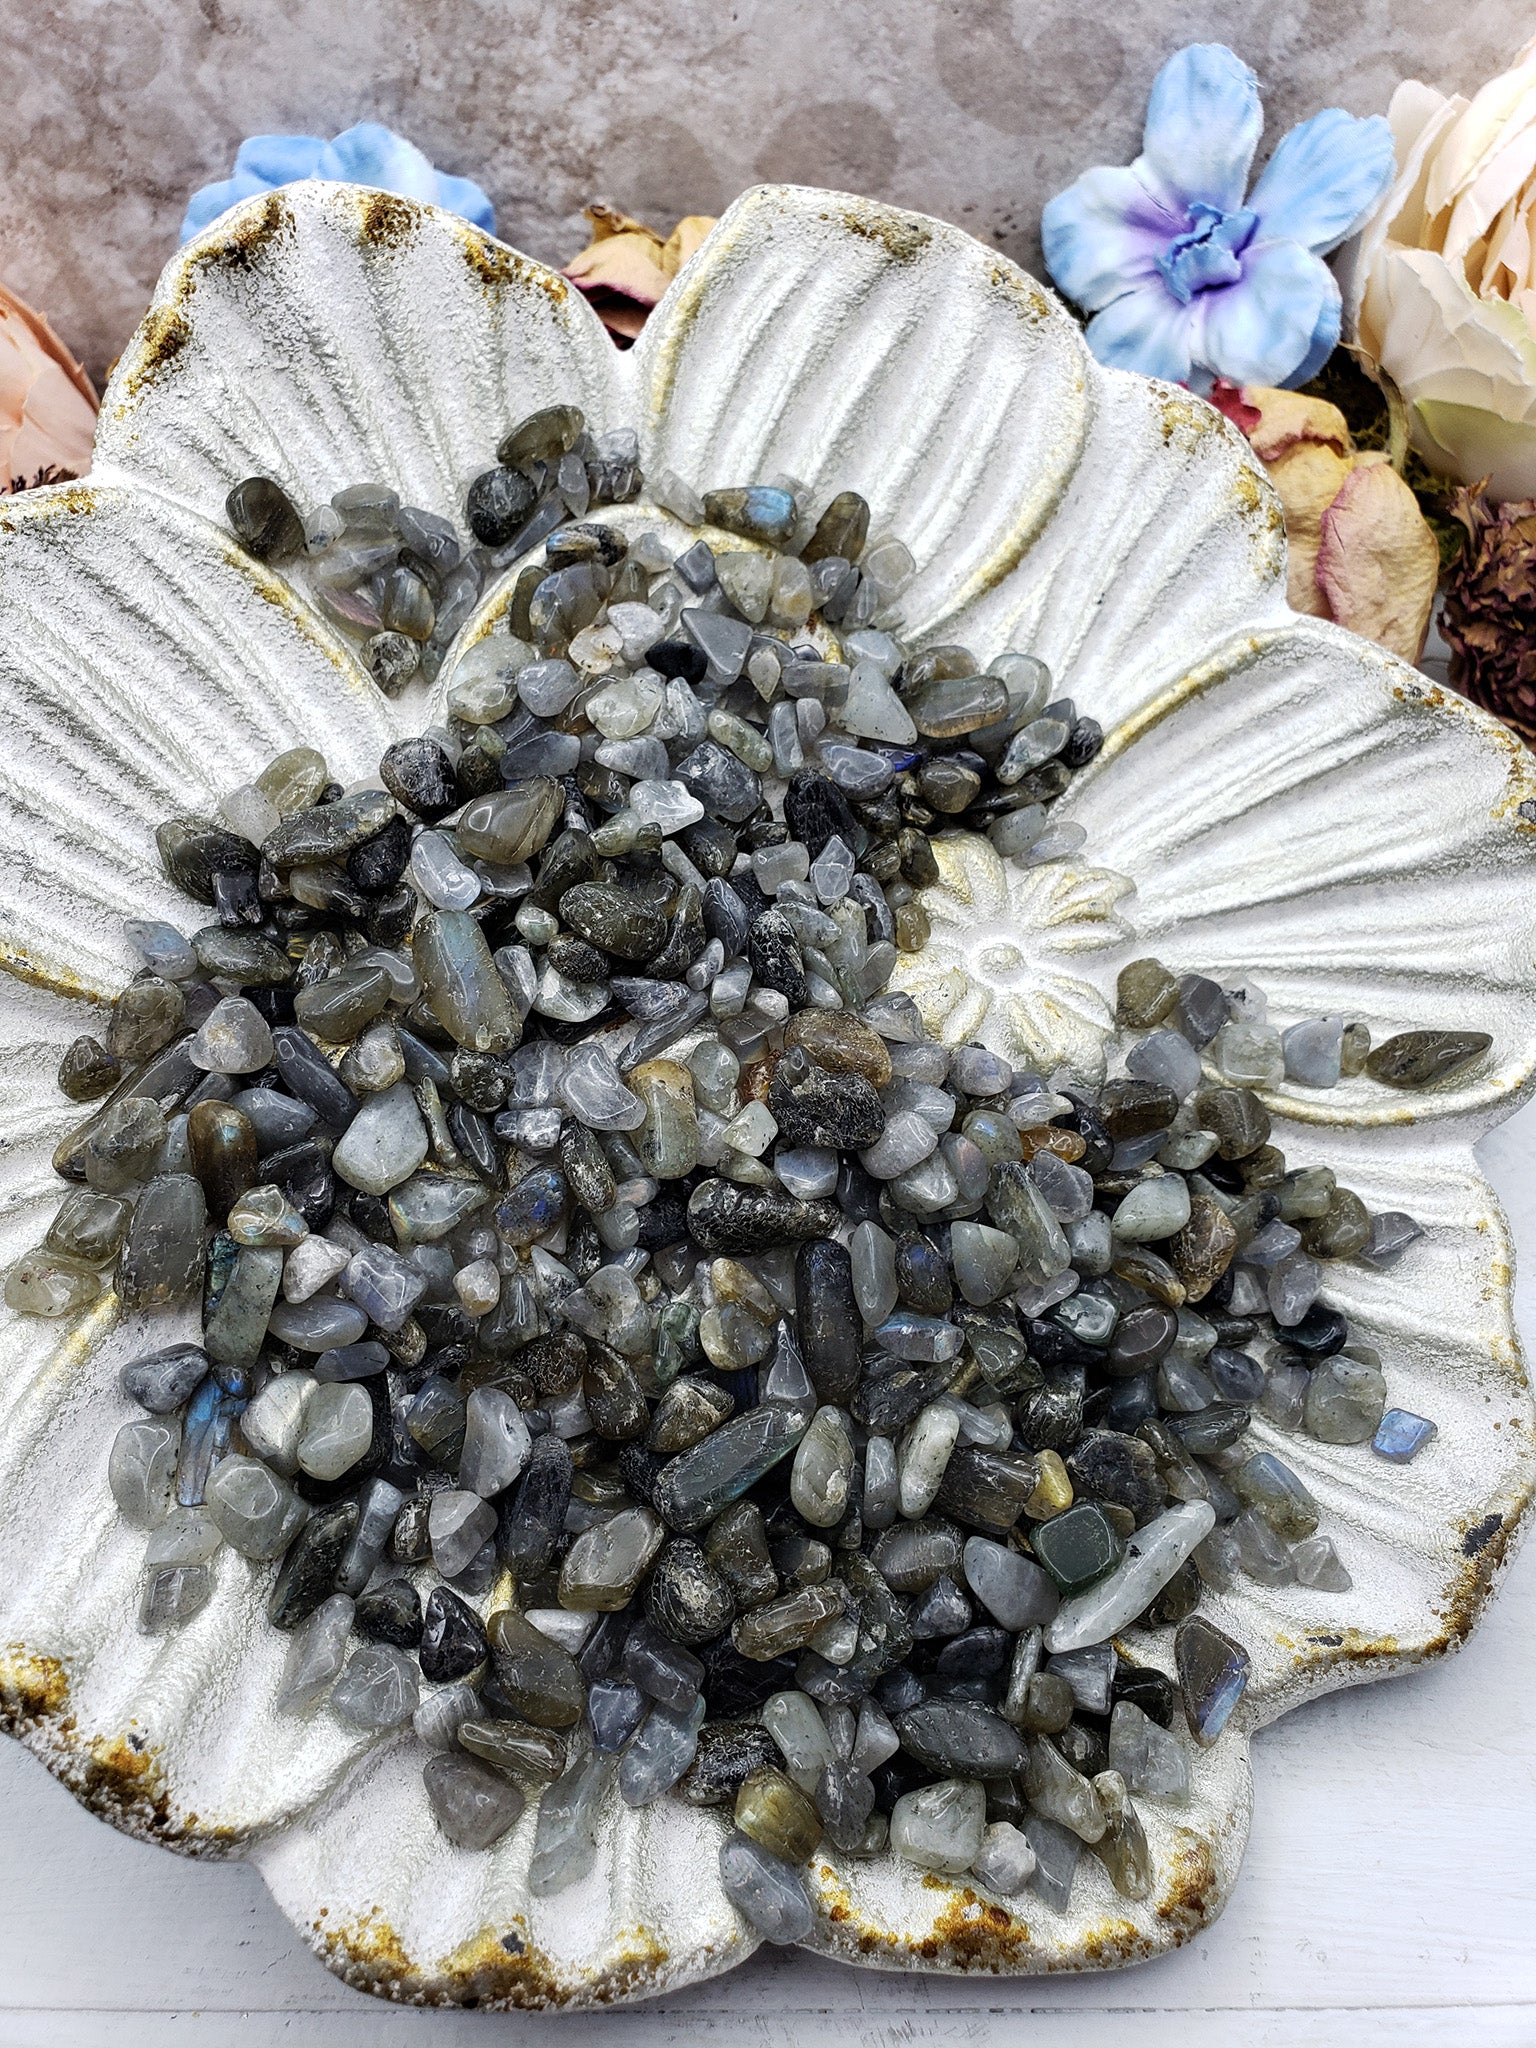 Seven ounces of labradorite stone chips on floral prop display